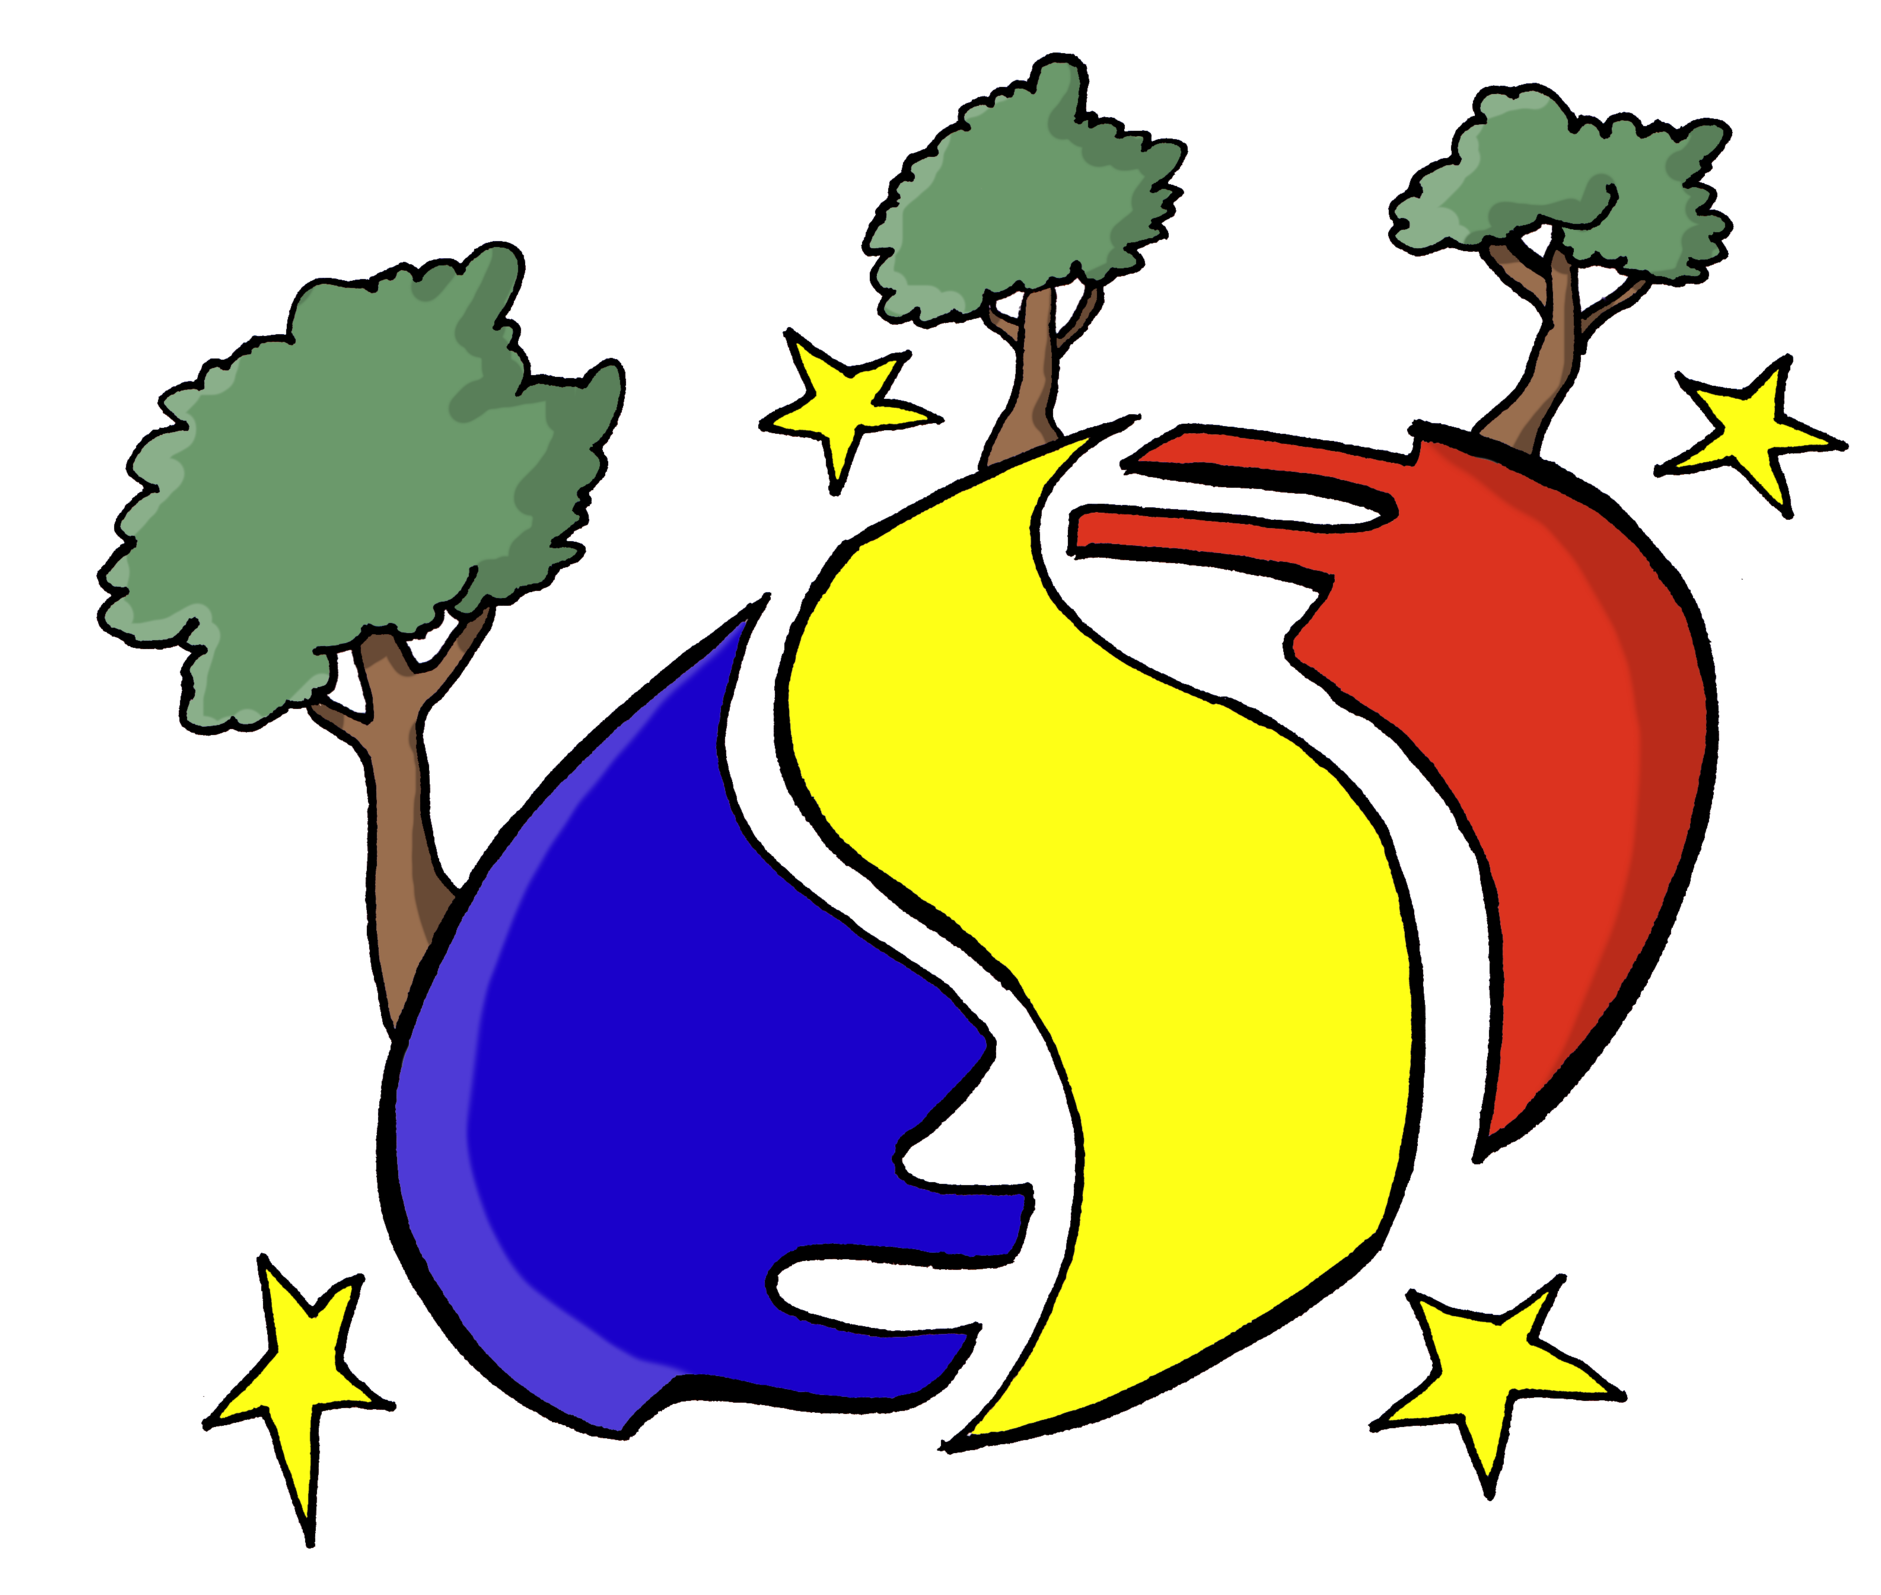 A Colorful Logo With Trees And Stars